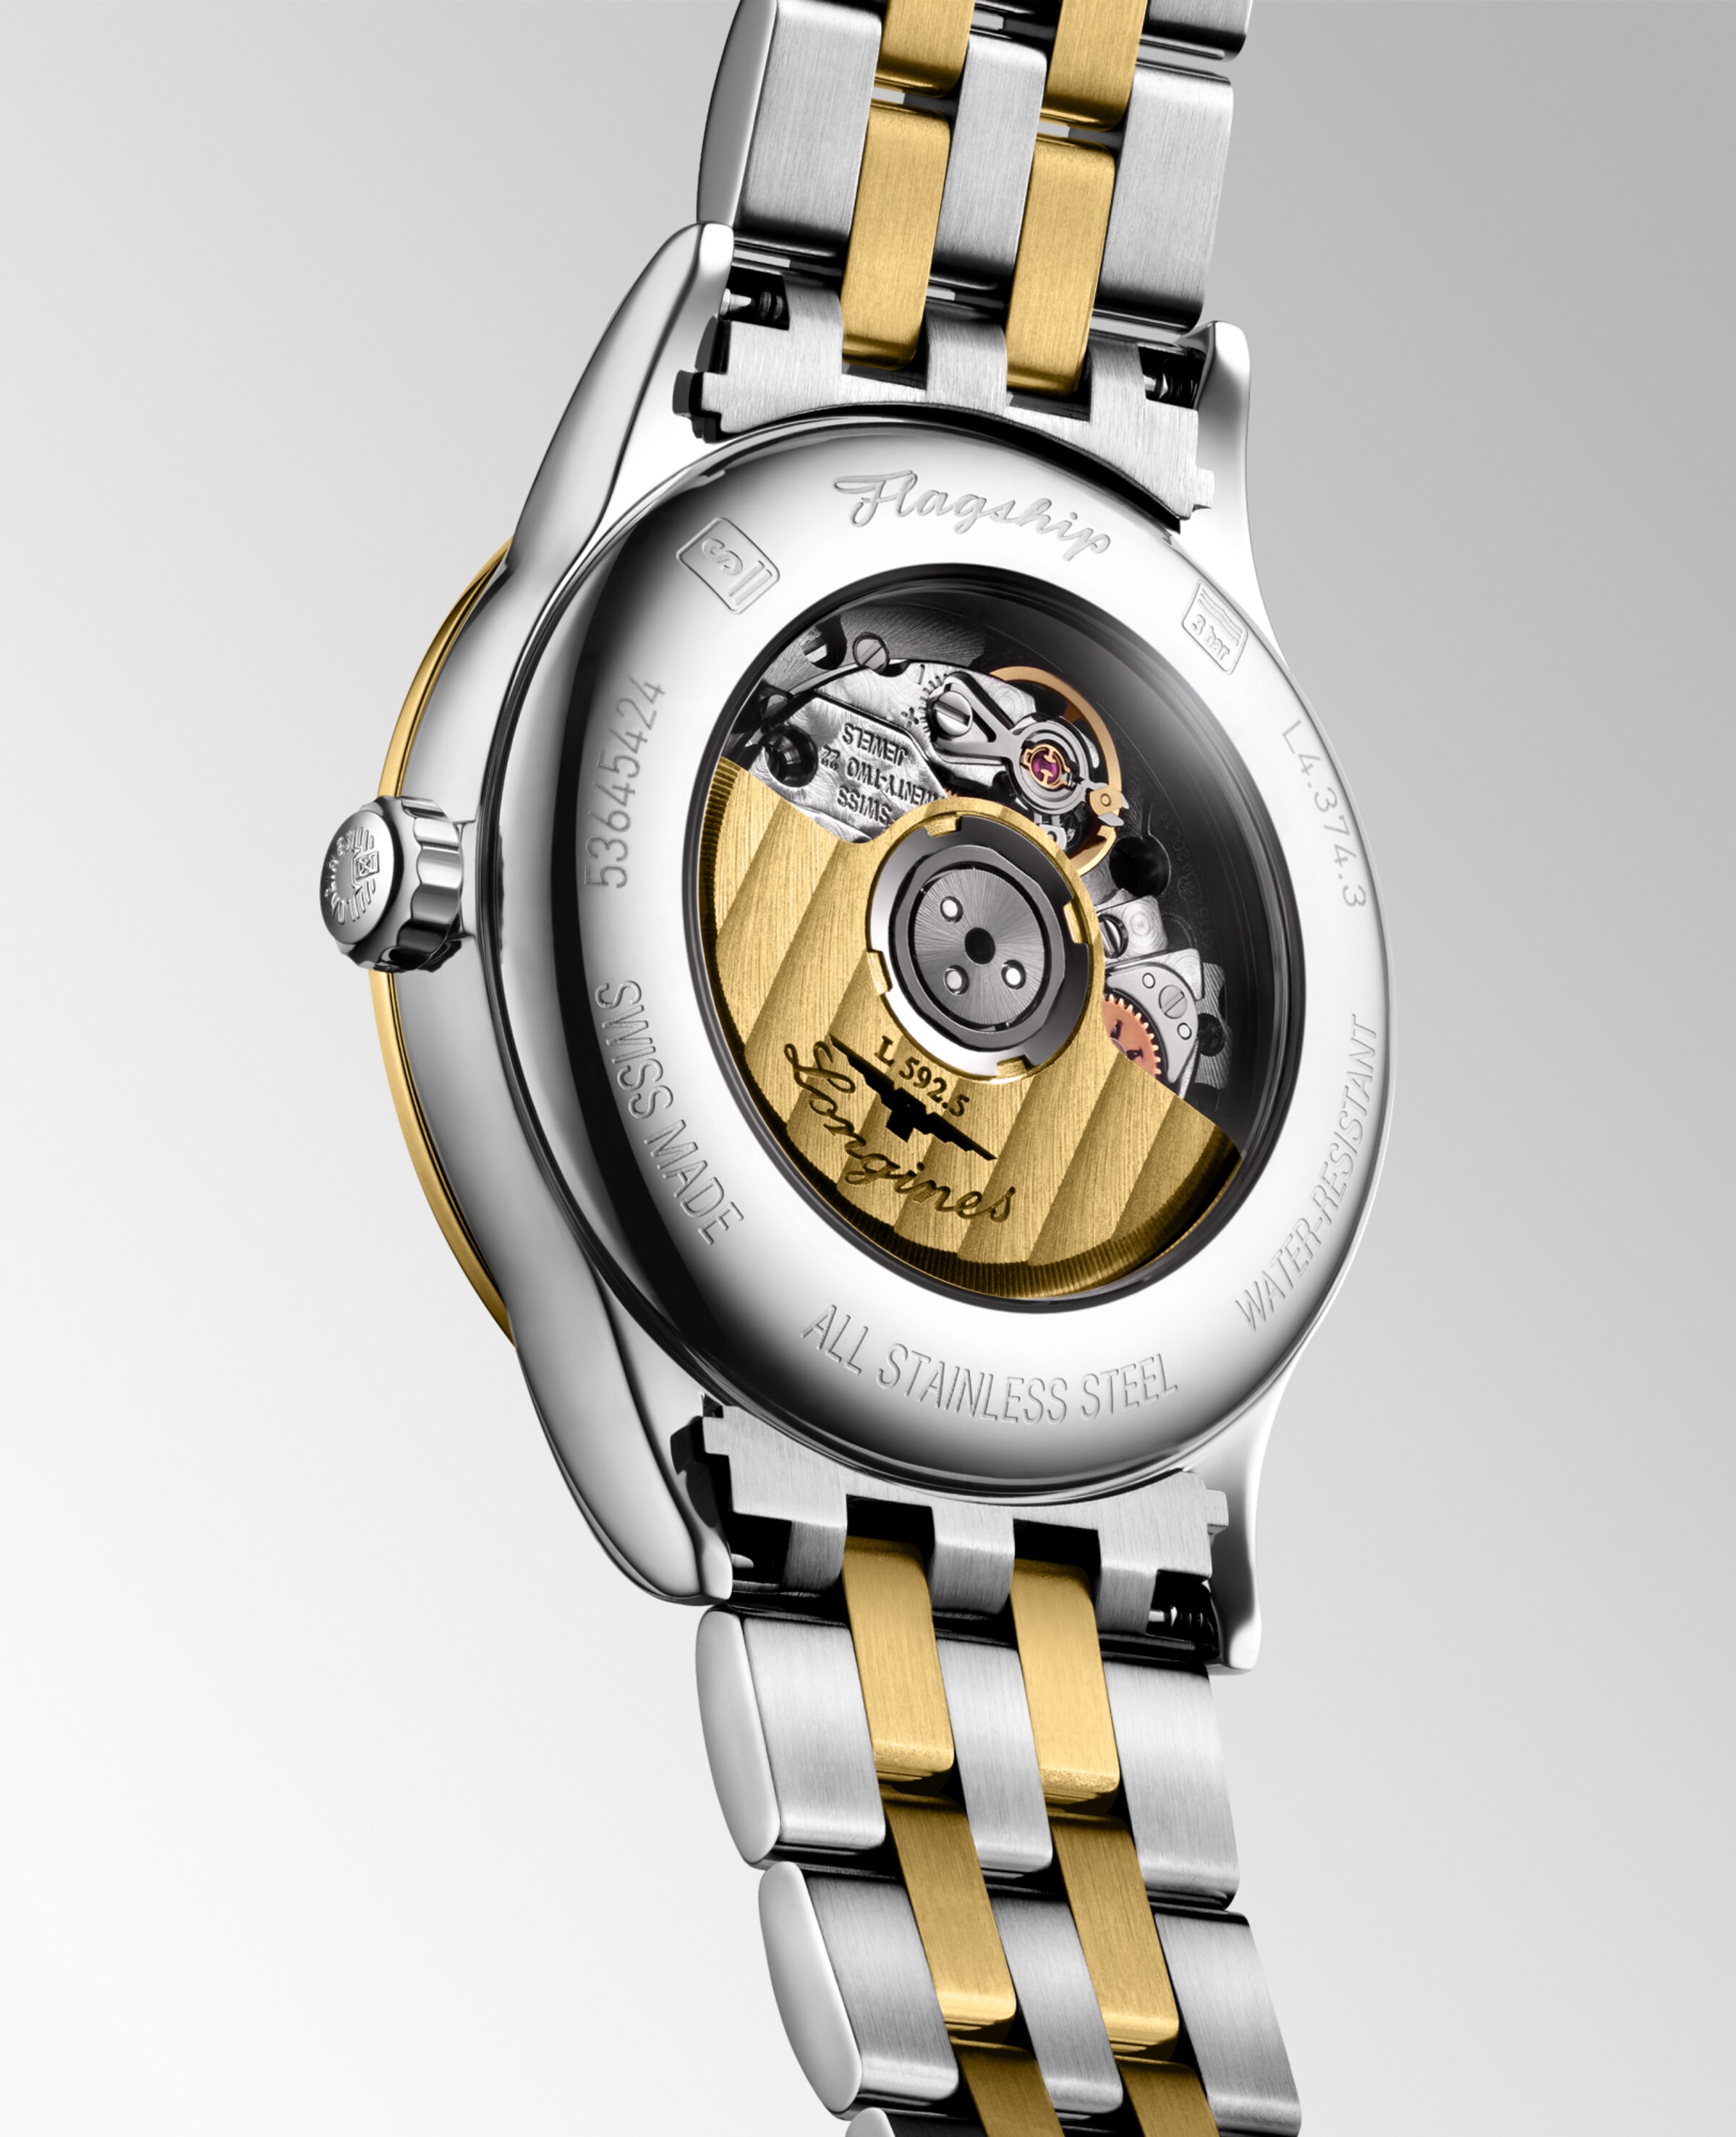 Longines FLAGSHIP Automatic Stainless steel and yellow PVD coating Watch - L4.374.3.37.7